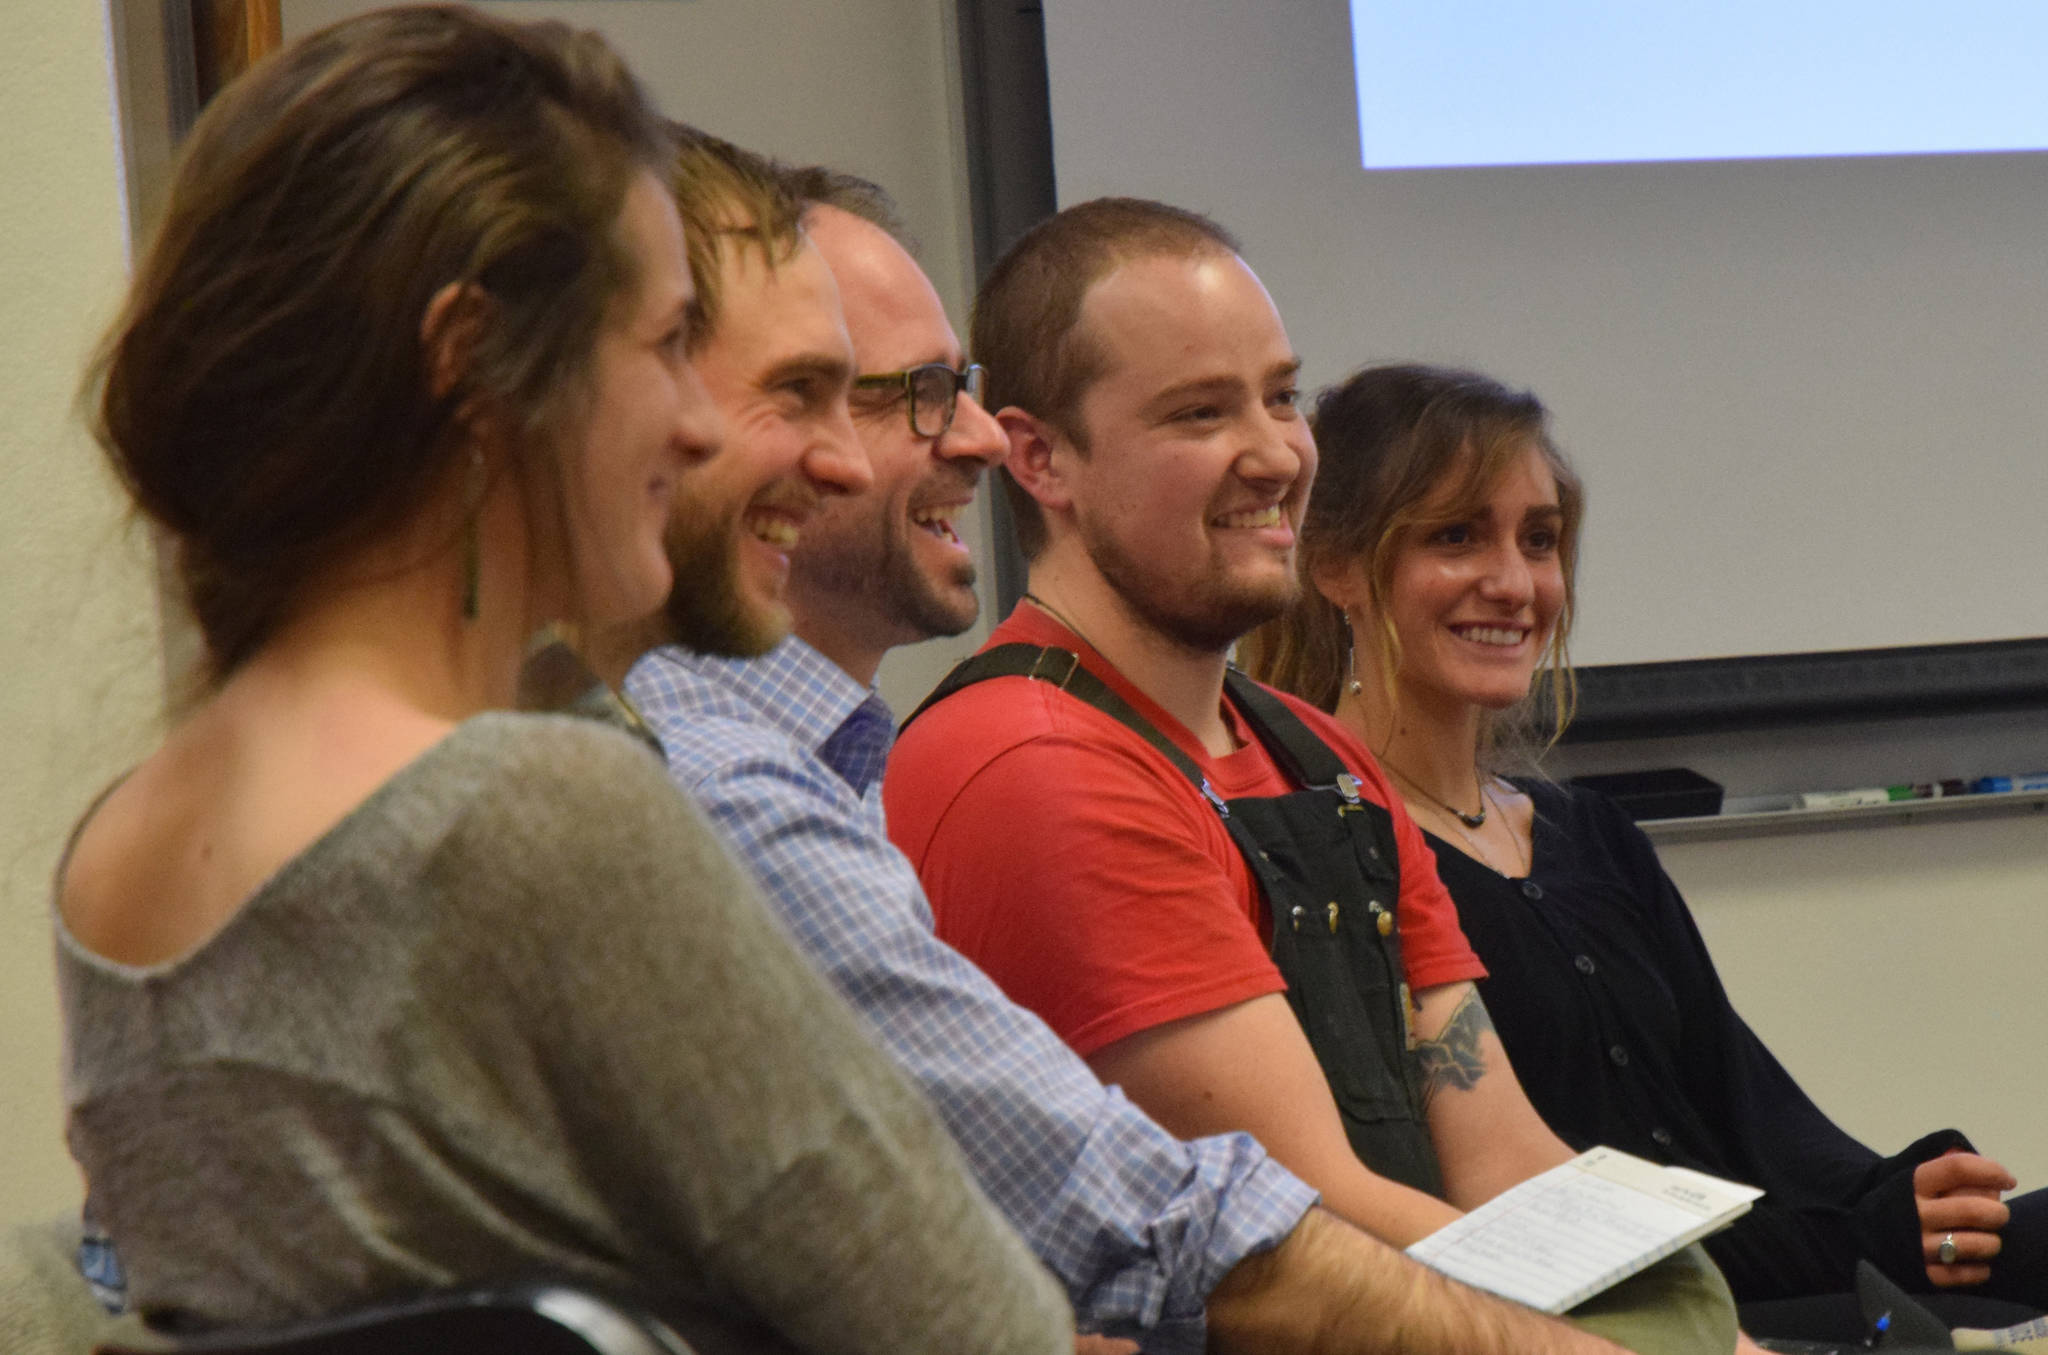 Lia Heifetz, Matt Kern, Colin Peacock, Eli Wray and Kaila Buerger all spoke at a panel for young food entrepreneurs on Tuesday, Jan. 16, 2018 at City Hall. (Kevin Gullufsen | Juneau Empire)